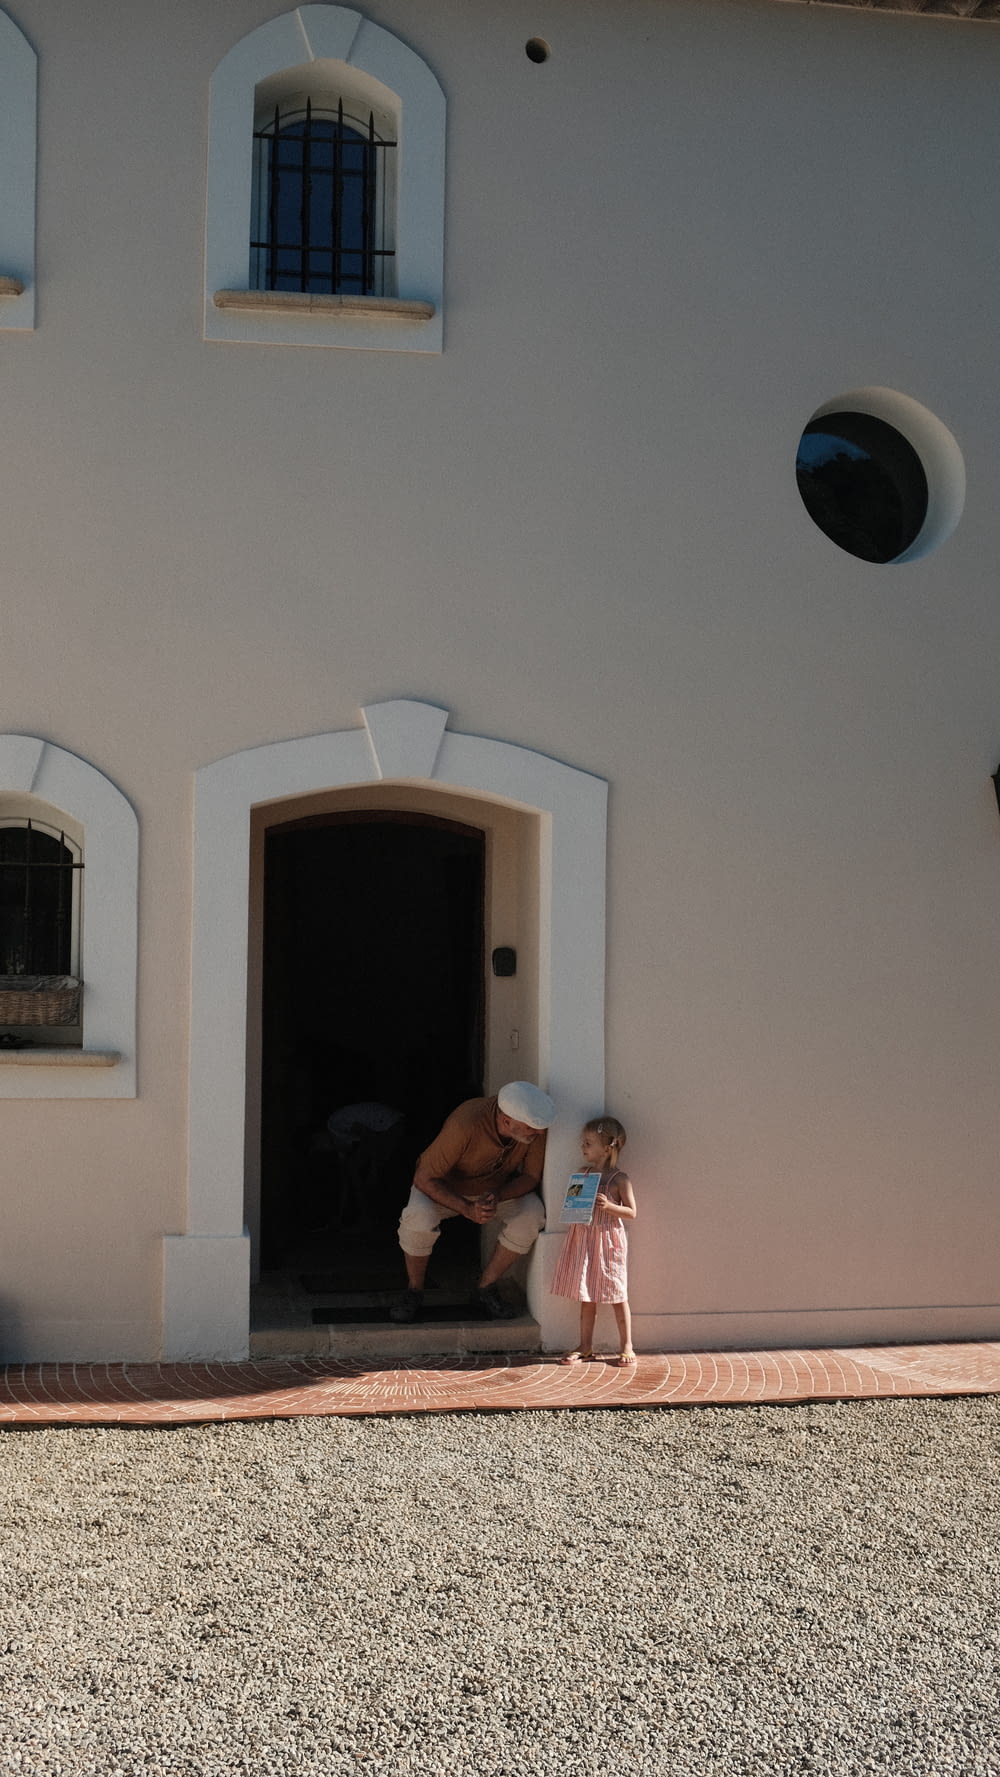 a person and a child standing in a doorway